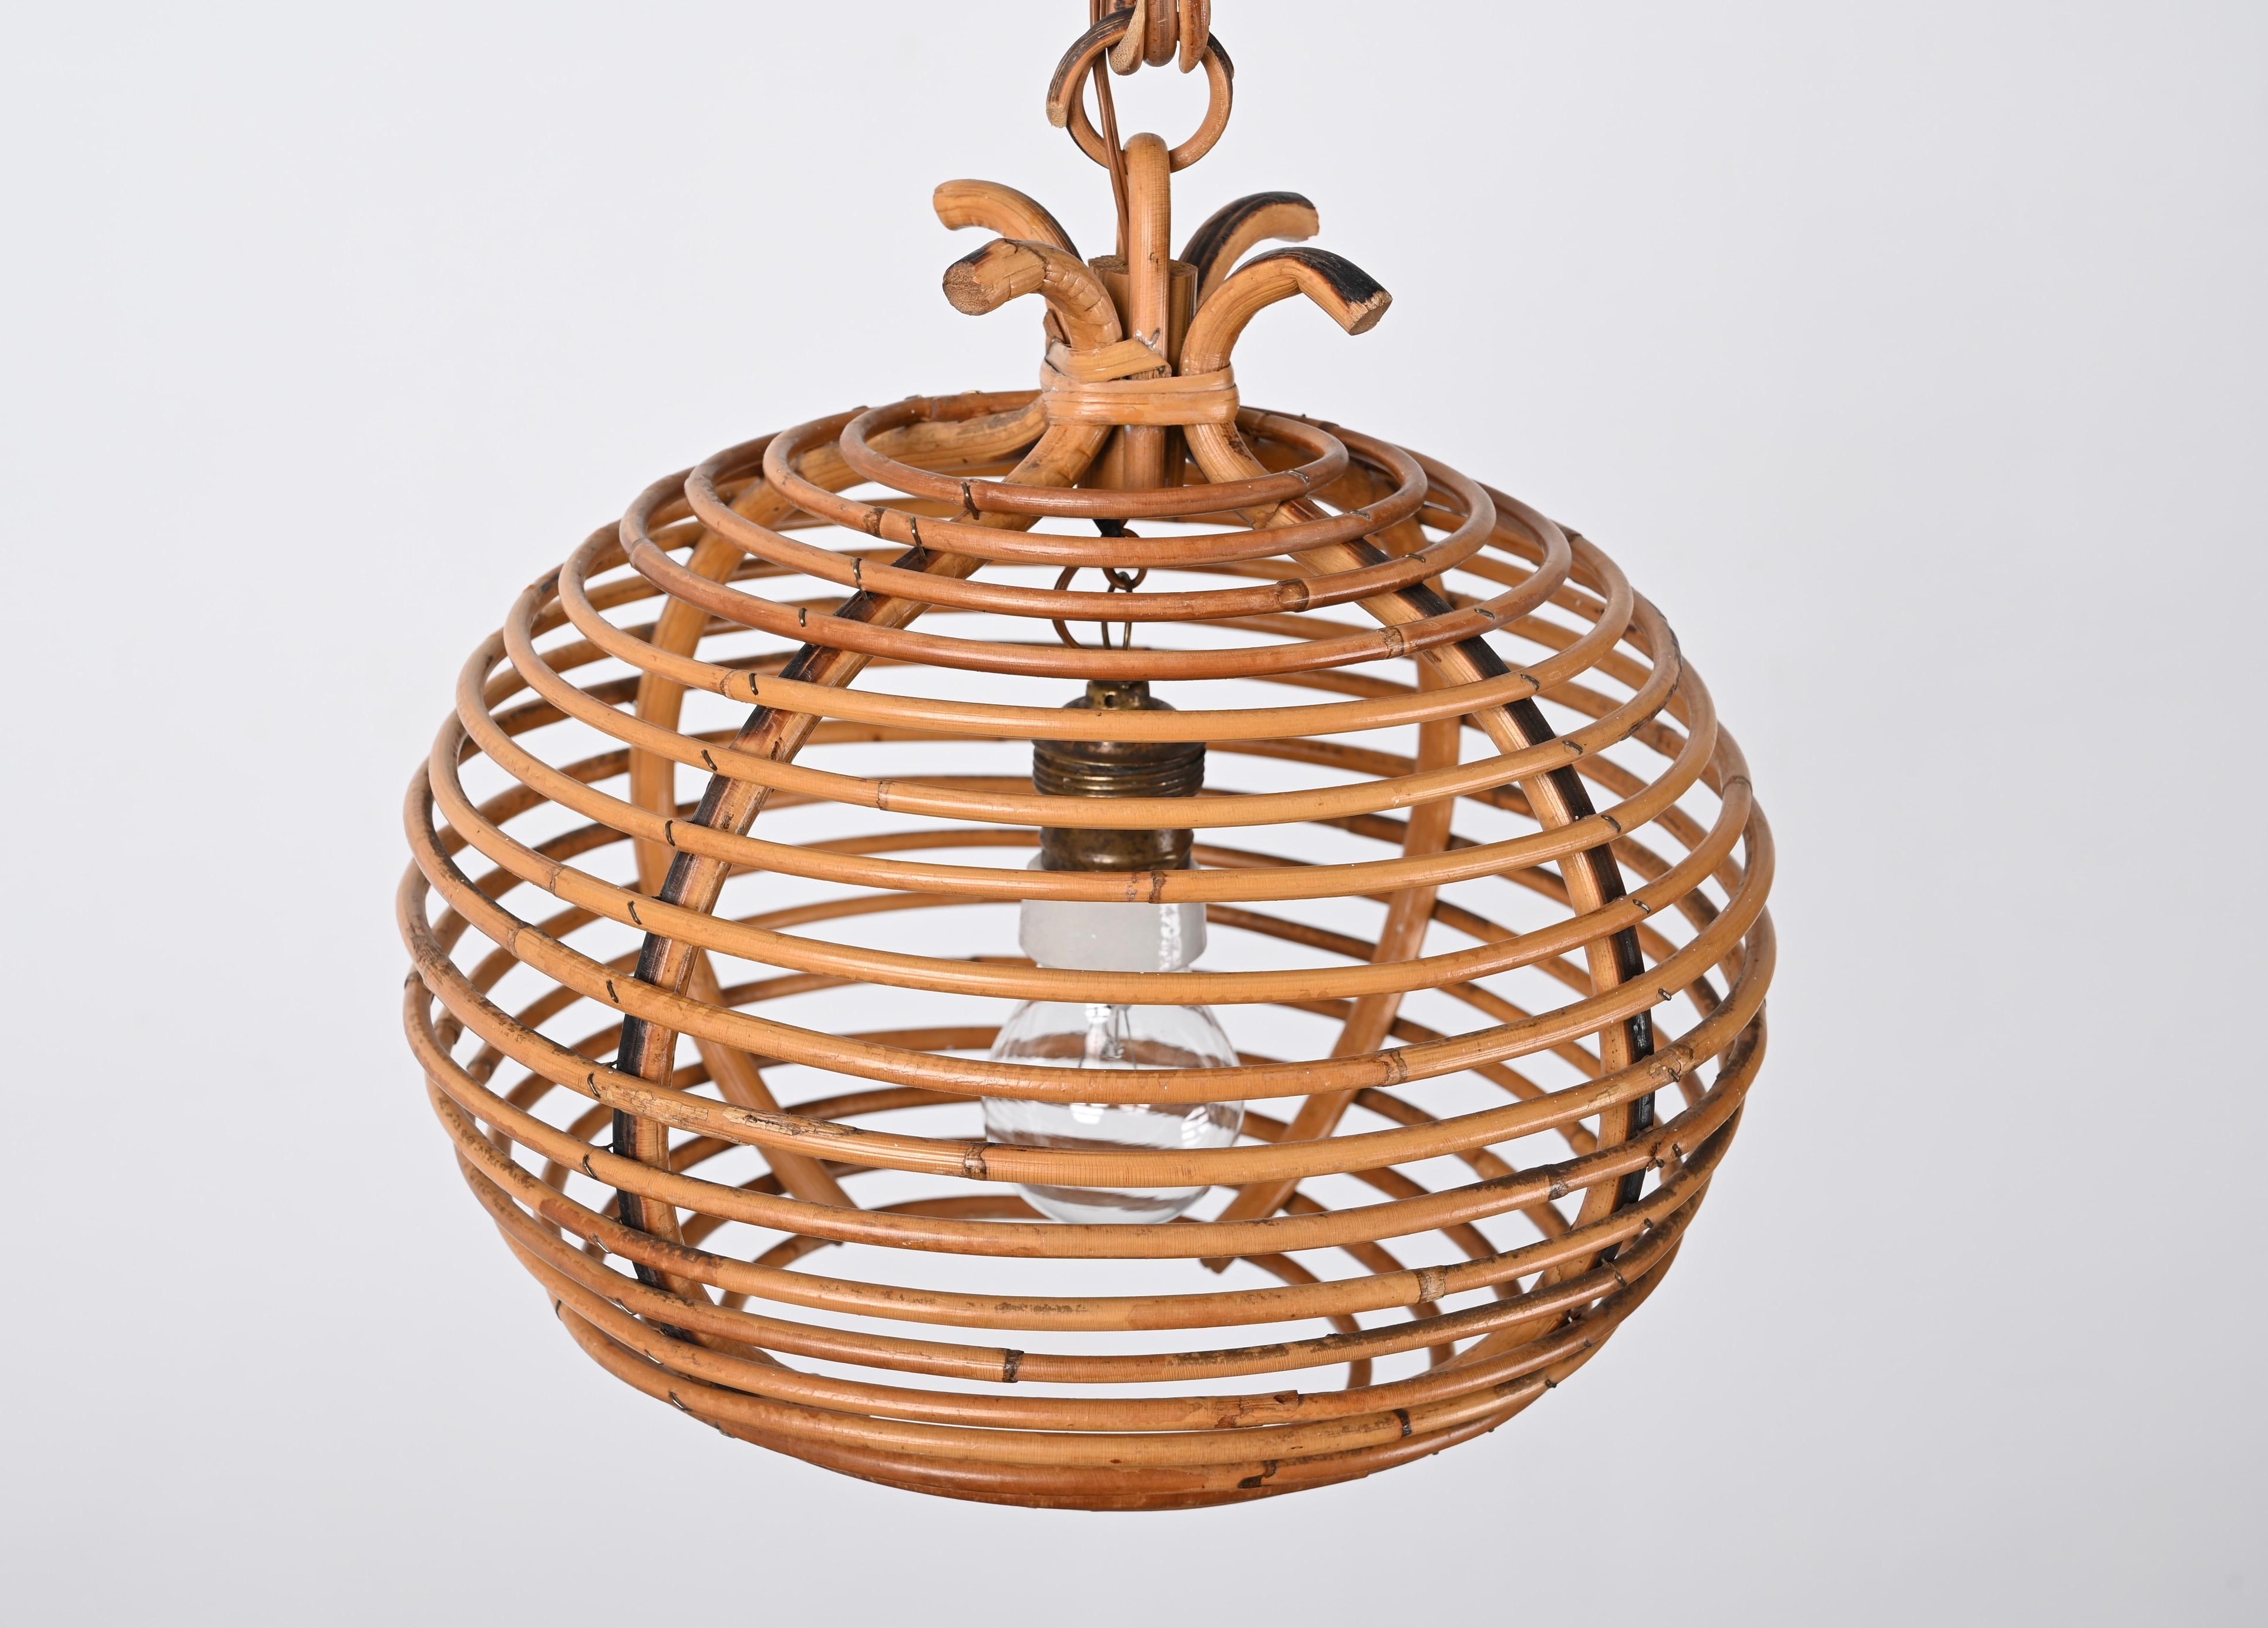 Midcentury French Riviera Bambo and Rattan Spherical Italian Chandelier, 1960s For Sale 3